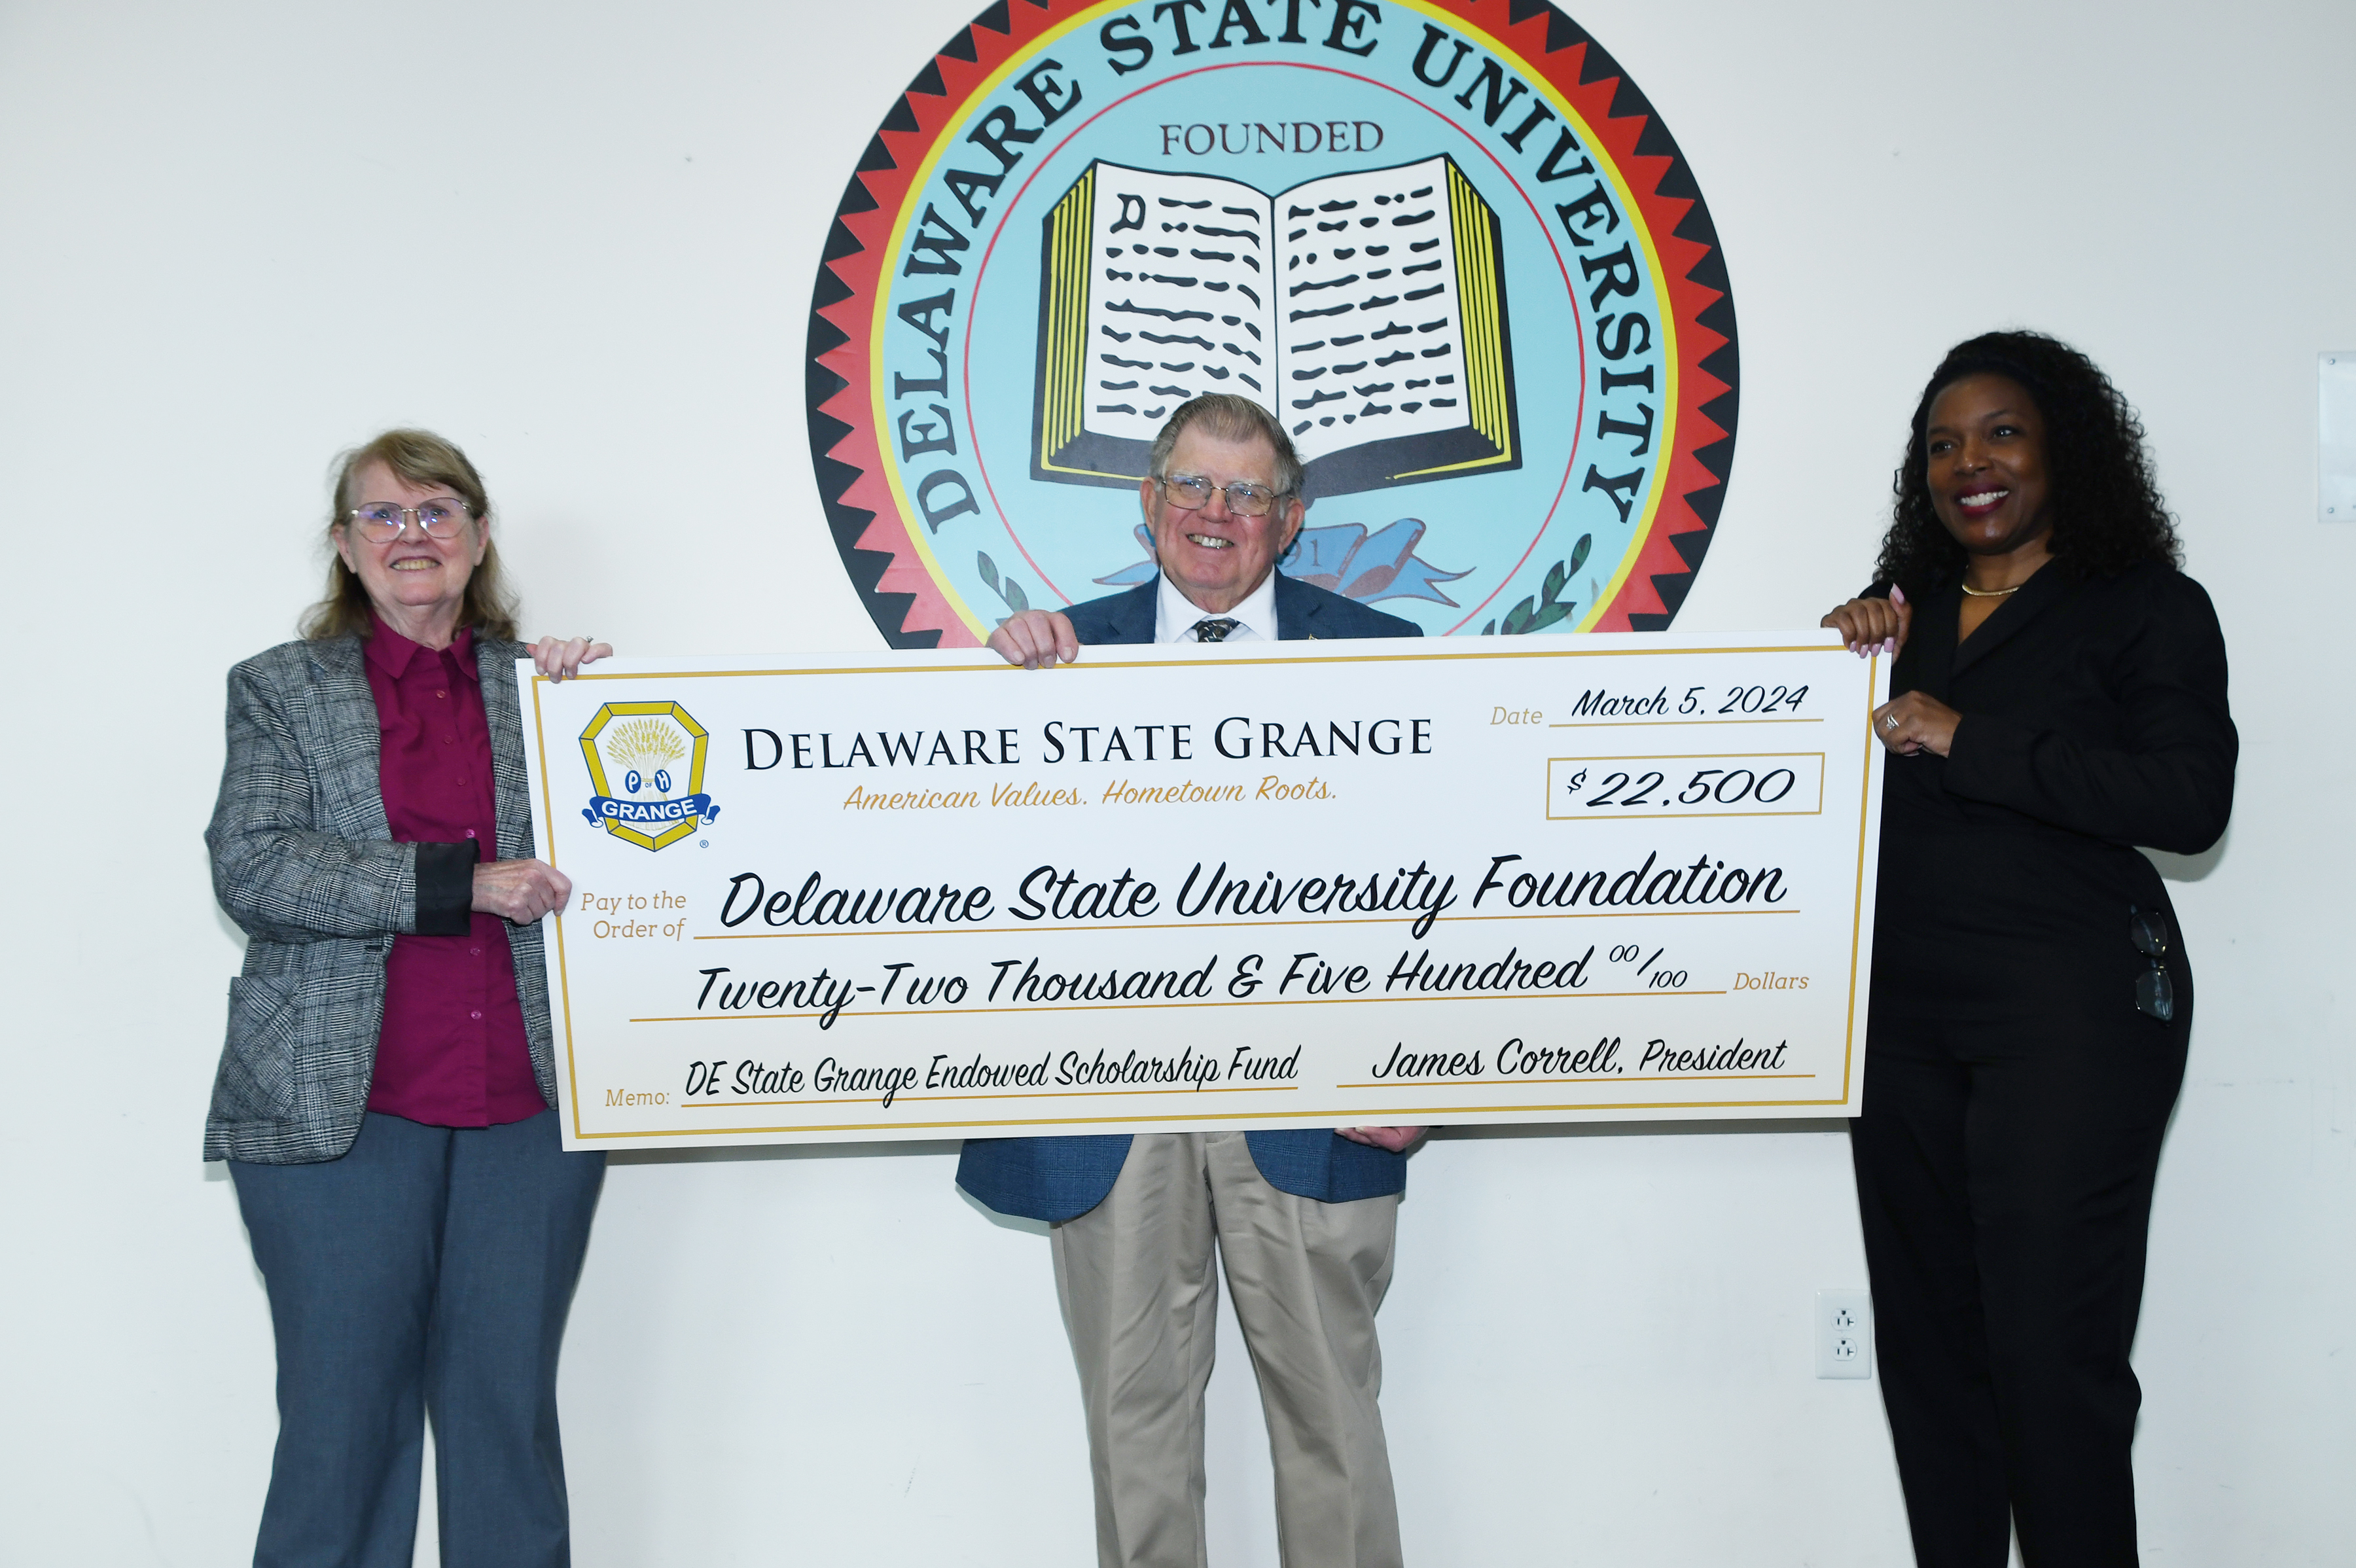 Delaware State Grange representatives Debbie Edwards (secretary) and Jimmy Correll (president) present a symbolic check representing their newly established endowment to Dean Cherese Winstead Casson of the DSU College of Agriculture, Science and Technology.